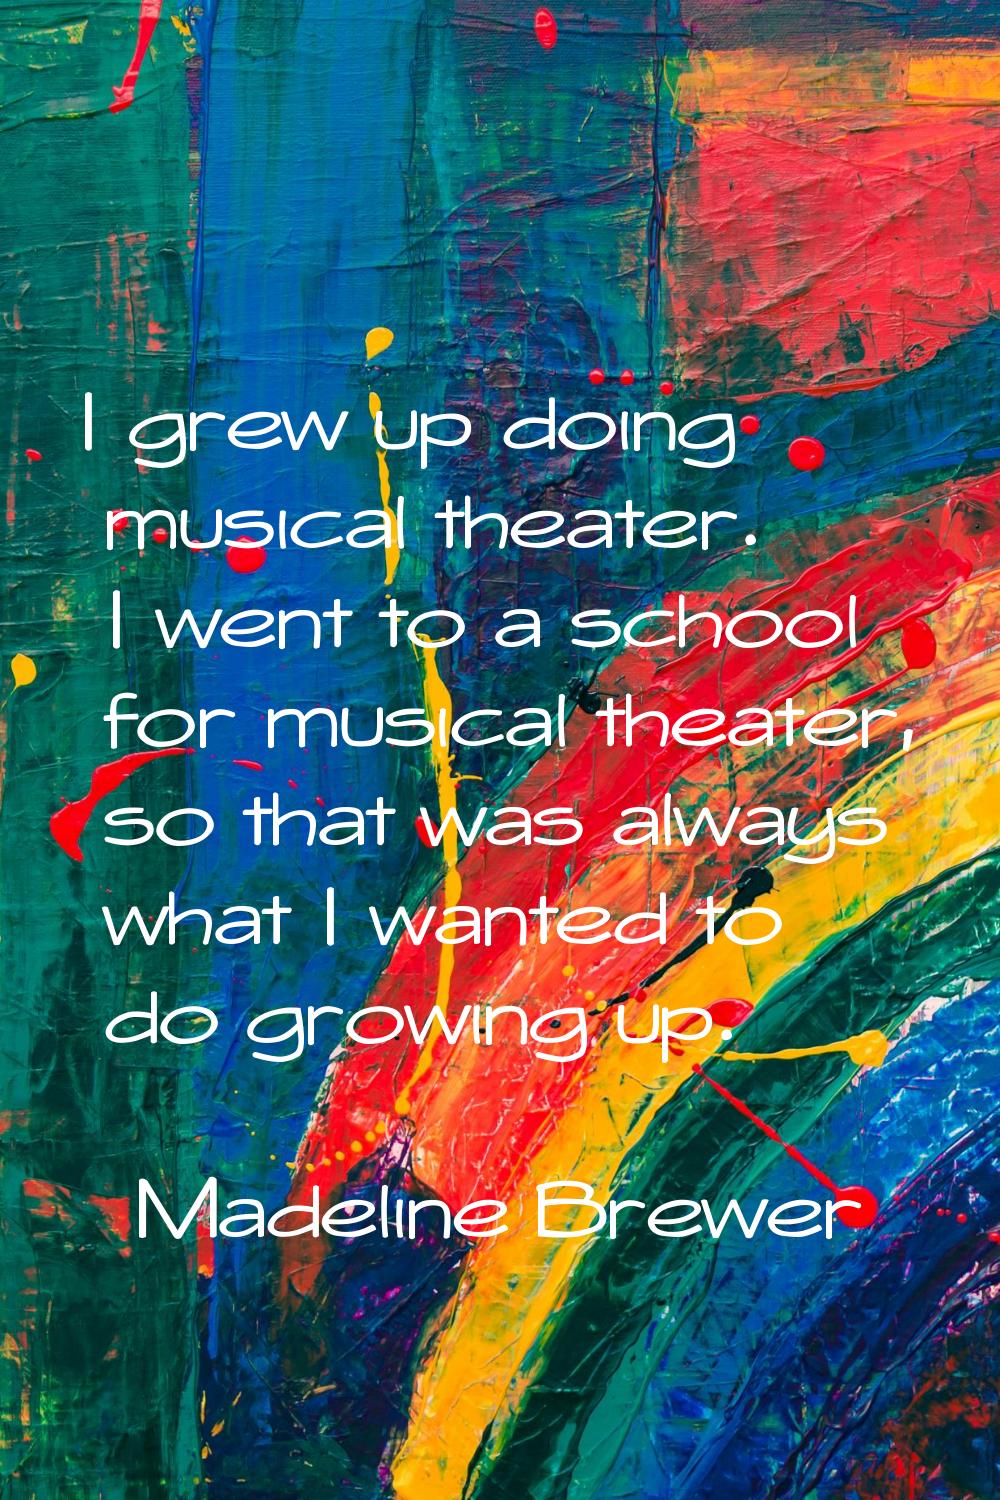 I grew up doing musical theater. I went to a school for musical theater, so that was always what I 